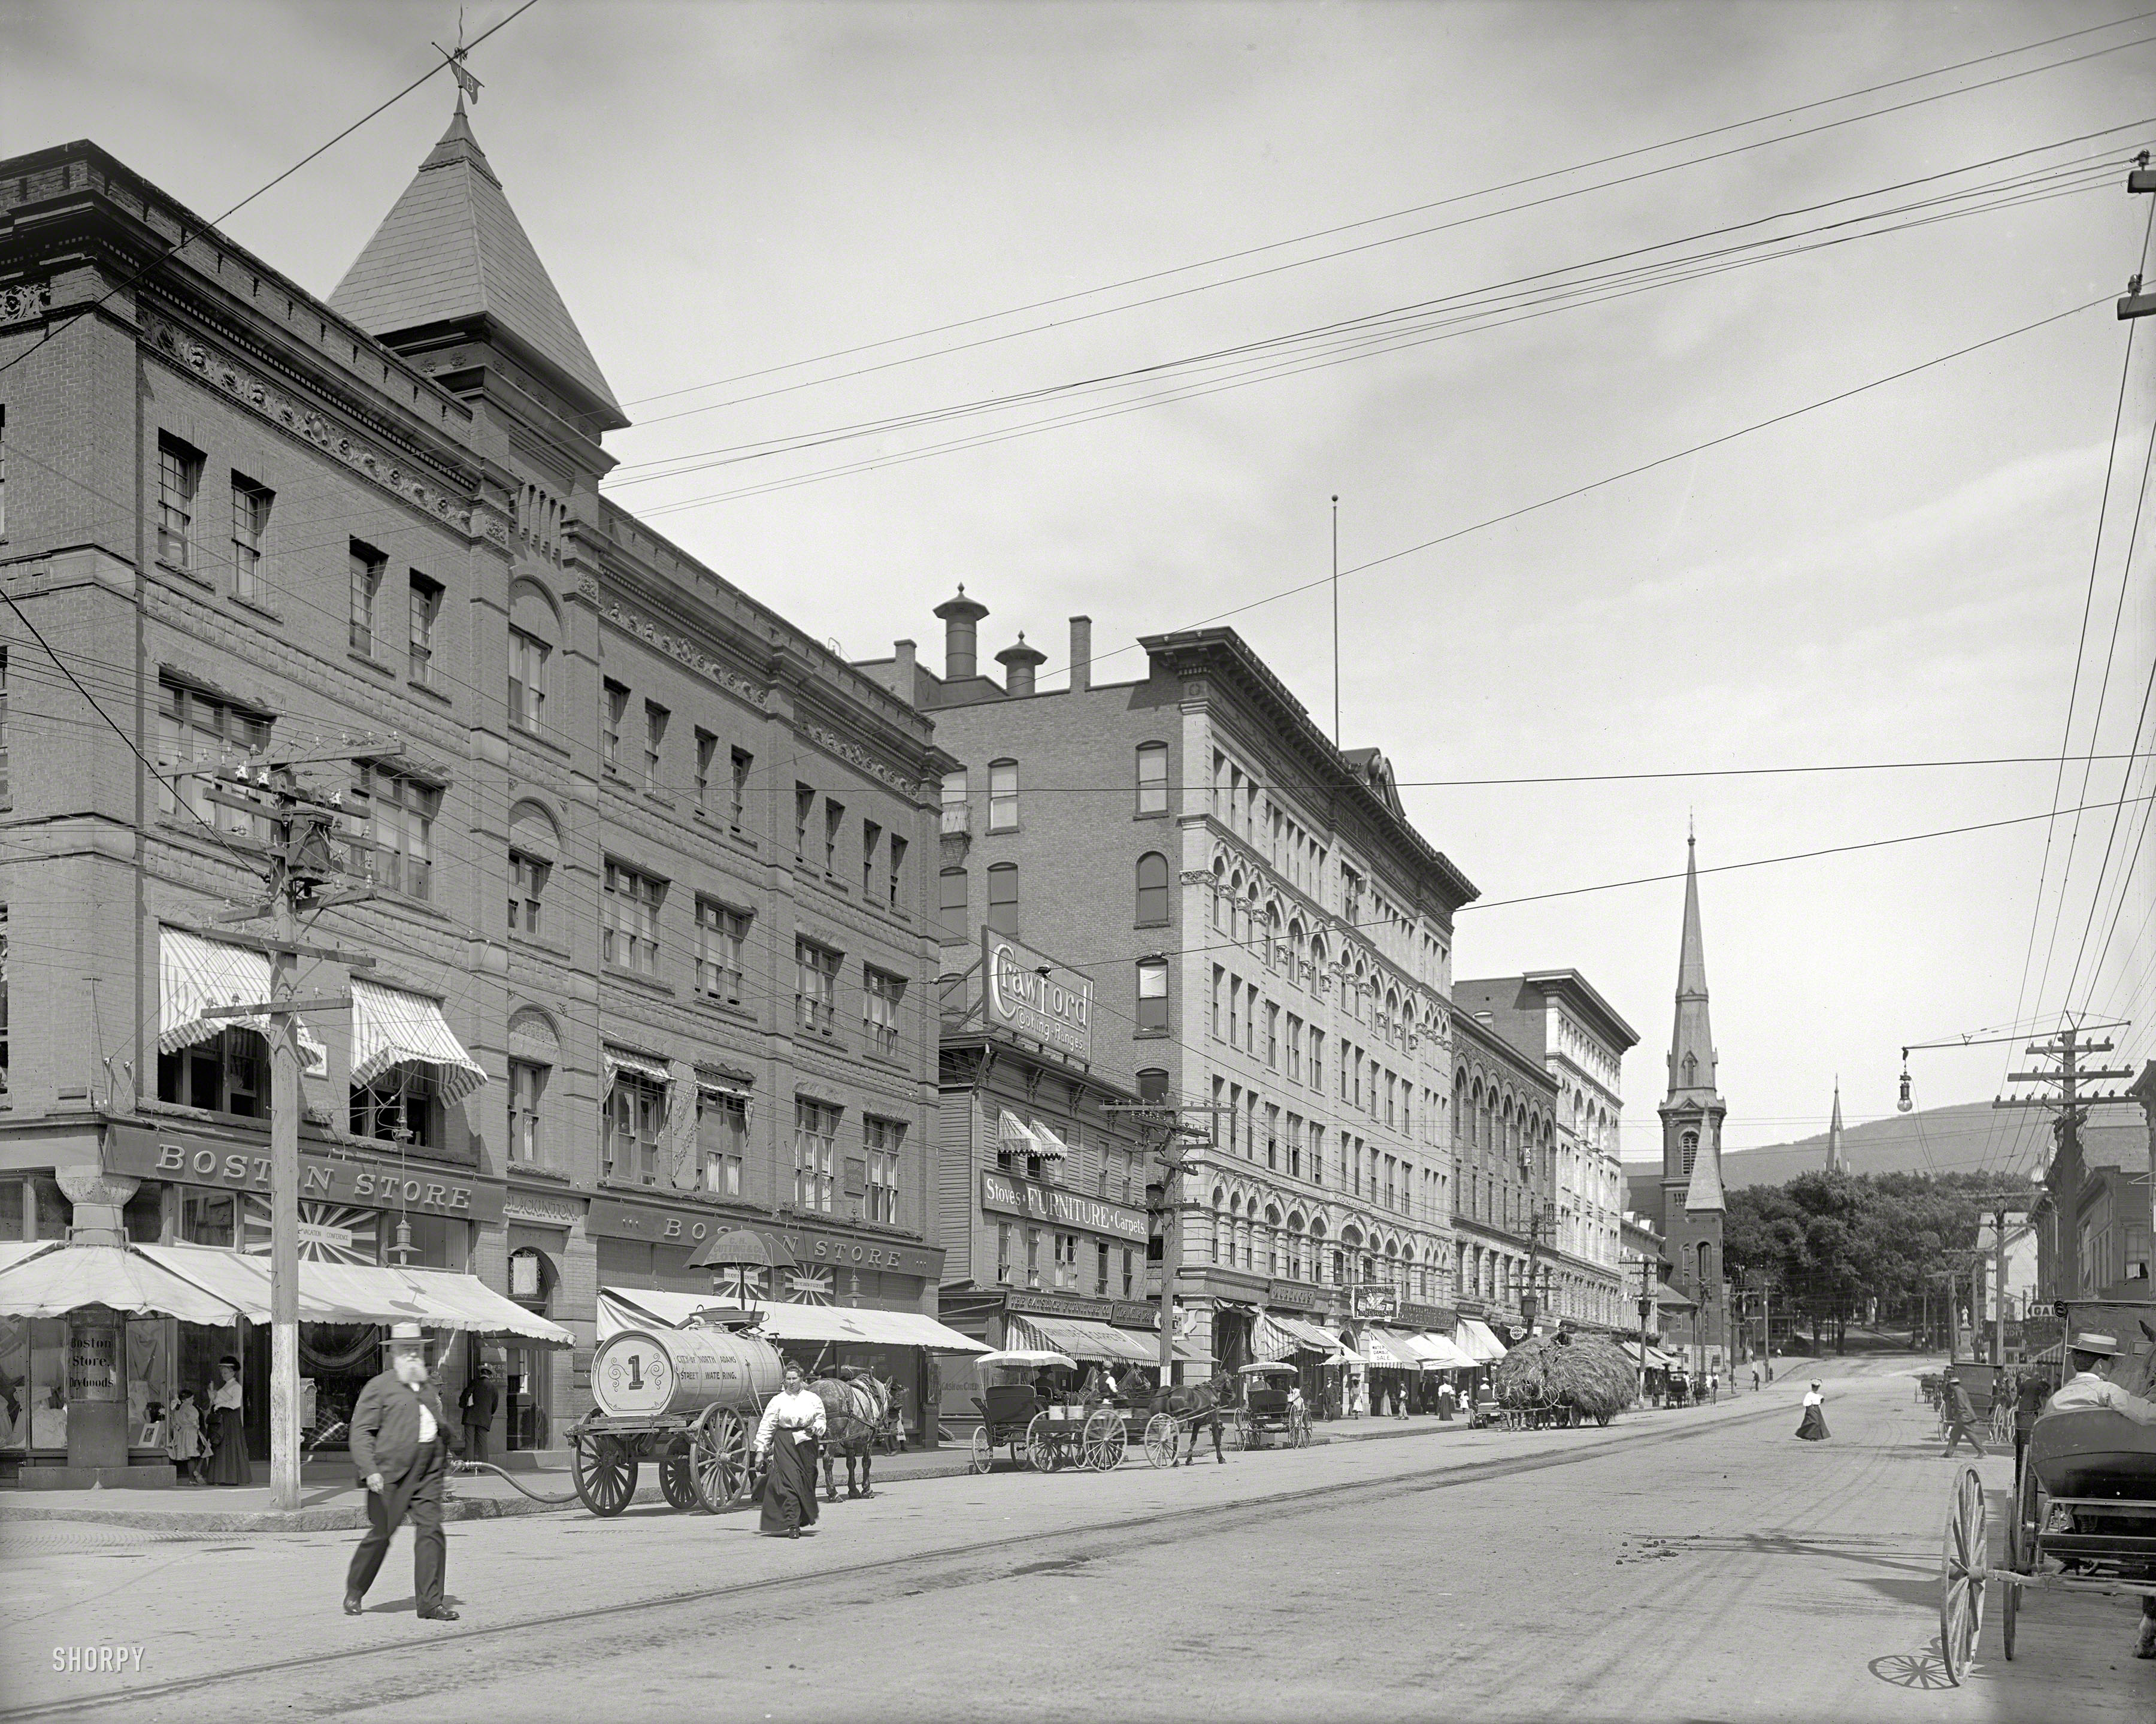 Circa 1907. North Adams, Massachusetts. "Main Street, looking east." 8x10 inch dry plate glass negative, Detroit Publishing Company. View full size.